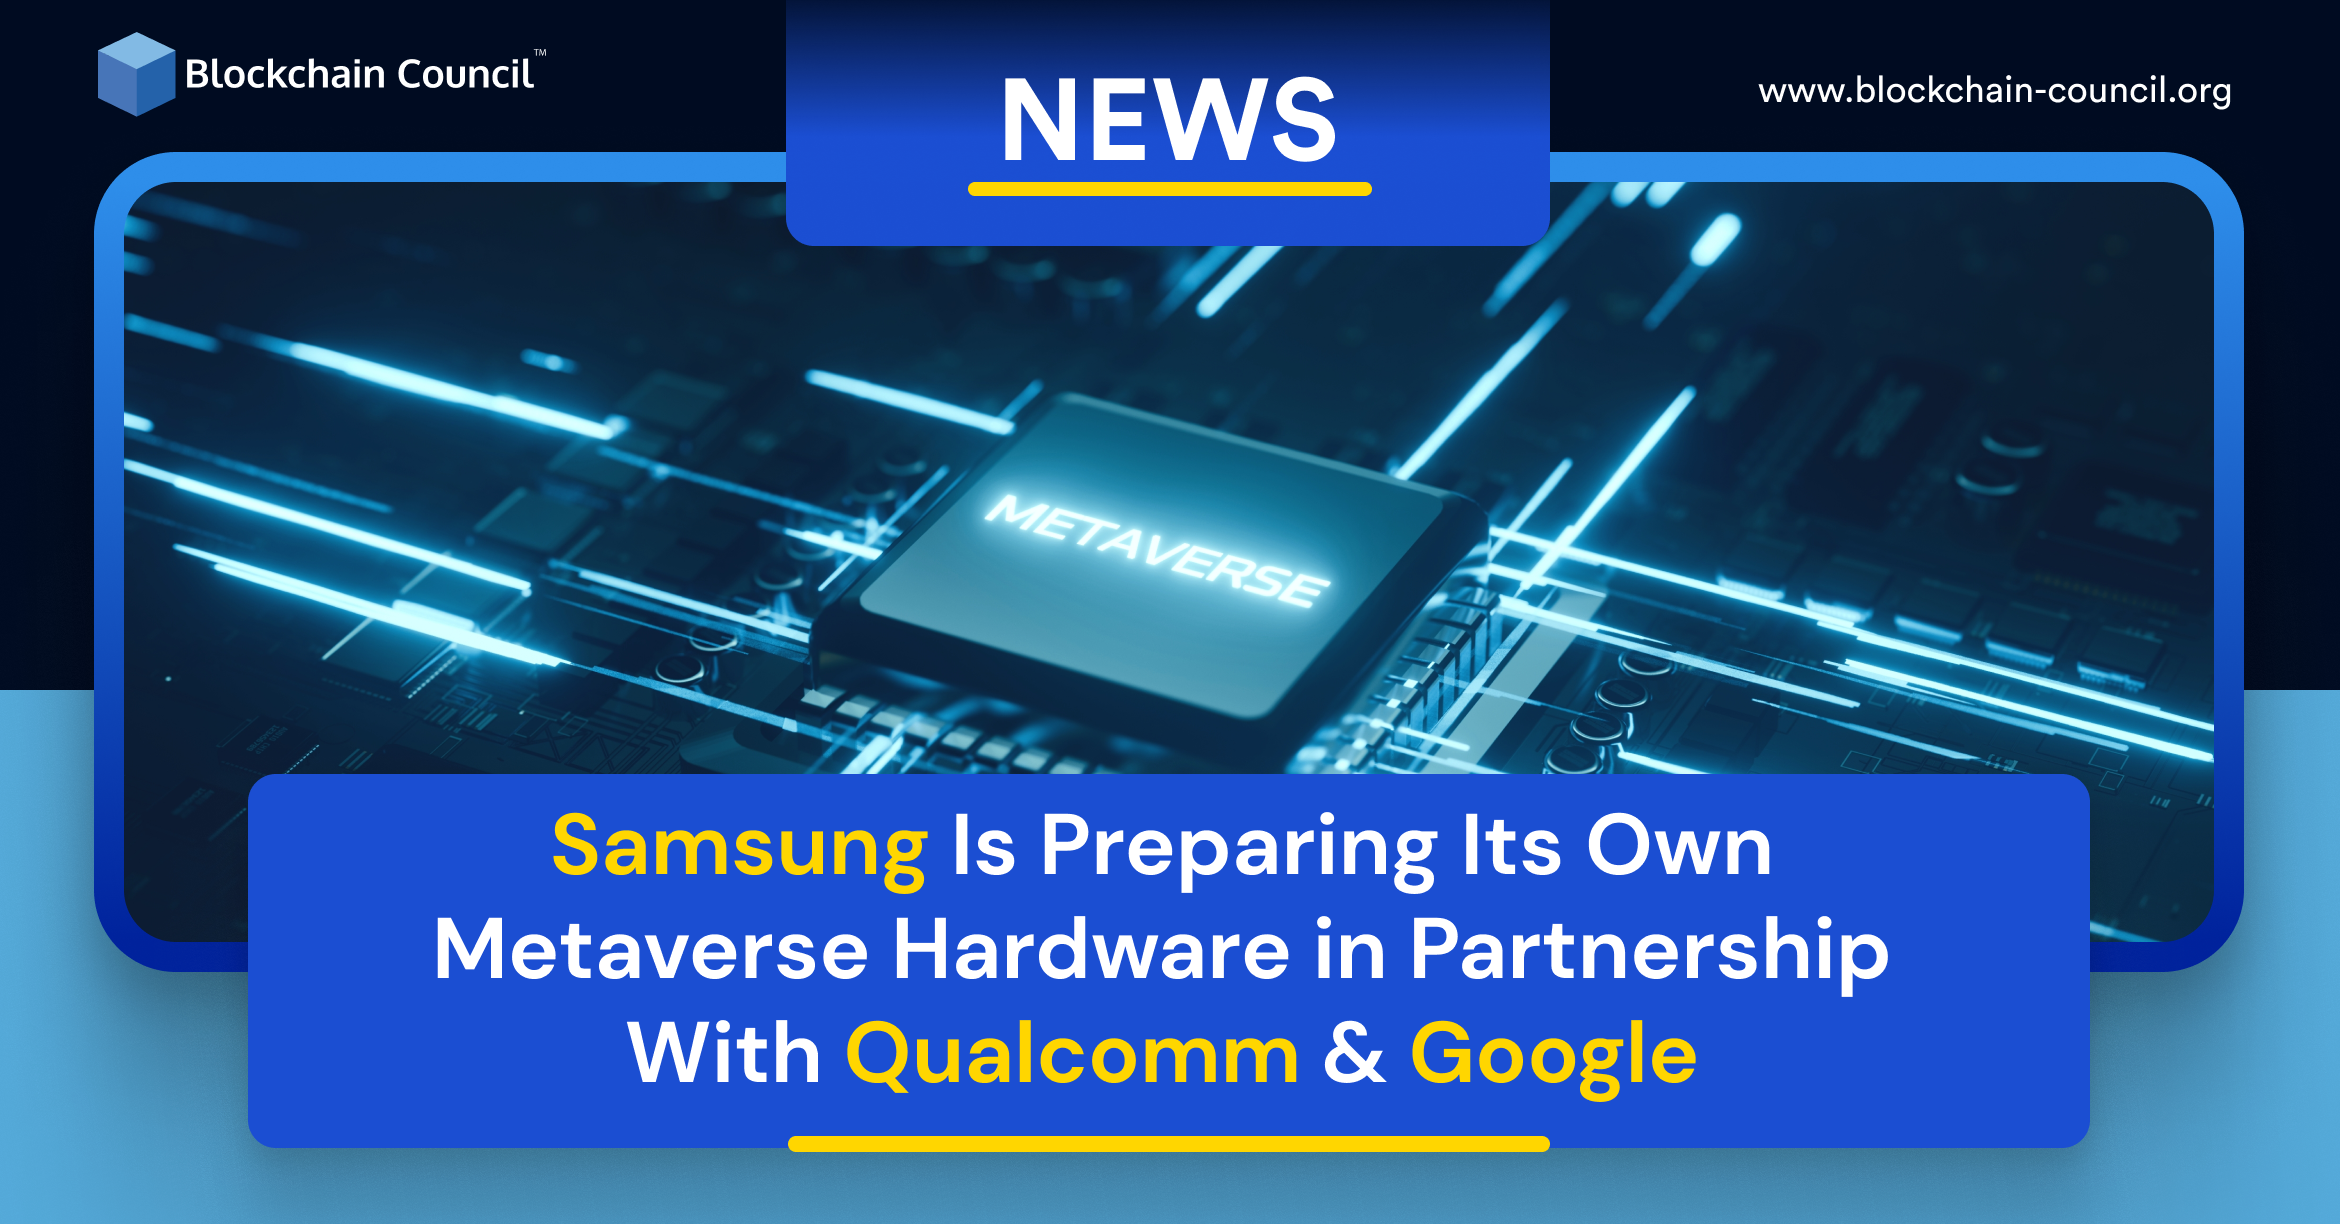 Samsung Is Preparing Its Own Metaverse Hardware in Partnership With Qualcomm & Google